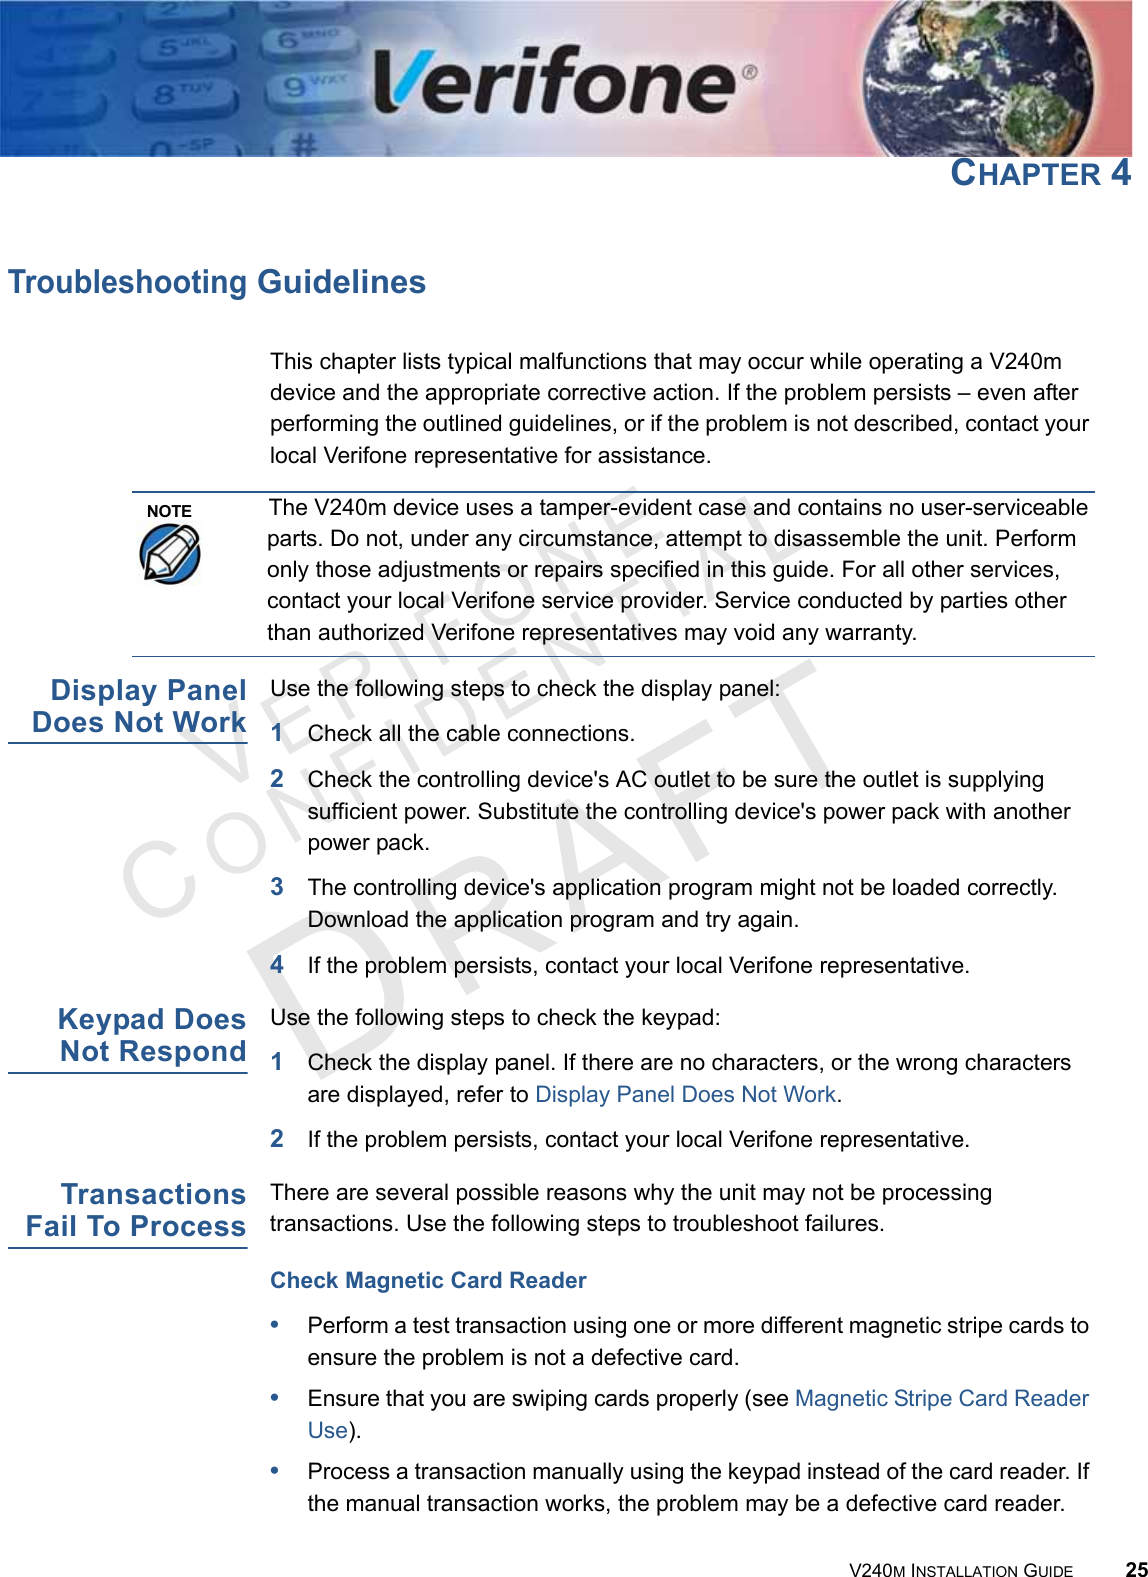 VERIFONECONFIDENTIAL V240M INSTALLATION GUIDE 25CHAPTER 4Troubleshooting GuidelinesThis chapter lists typical malfunctions that may occur while operating a V240m device and the appropriate corrective action. If the problem persists – even after performing the outlined guidelines, or if the problem is not described, contact your local Verifone representative for assistance.Display Panel Does Not WorkUse the following steps to check the display panel:1Check all the cable connections.2Check the controlling device&apos;s AC outlet to be sure the outlet is supplying sufficient power. Substitute the controlling device&apos;s power pack with another power pack.3The controlling device&apos;s application program might not be loaded correctly. Download the application program and try again.4If the problem persists, contact your local Verifone representative.Keypad Does Not RespondUse the following steps to check the keypad:1Check the display panel. If there are no characters, or the wrong characters are displayed, refer to Display Panel Does Not Work.2If the problem persists, contact your local Verifone representative.Transactions Fail To ProcessThere are several possible reasons why the unit may not be processing transactions. Use the following steps to troubleshoot failures.Check Magnetic Card Reader•Perform a test transaction using one or more different magnetic stripe cards to ensure the problem is not a defective card.•Ensure that you are swiping cards properly (see Magnetic Stripe Card Reader Use).•Process a transaction manually using the keypad instead of the card reader. If the manual transaction works, the problem may be a defective card reader.NOTEThe V240m device uses a tamper-evident case and contains no user-serviceable parts. Do not, under any circumstance, attempt to disassemble the unit. Perform only those adjustments or repairs specified in this guide. For all other services, contact your local Verifone service provider. Service conducted by parties other than authorized Verifone representatives may void any warranty.